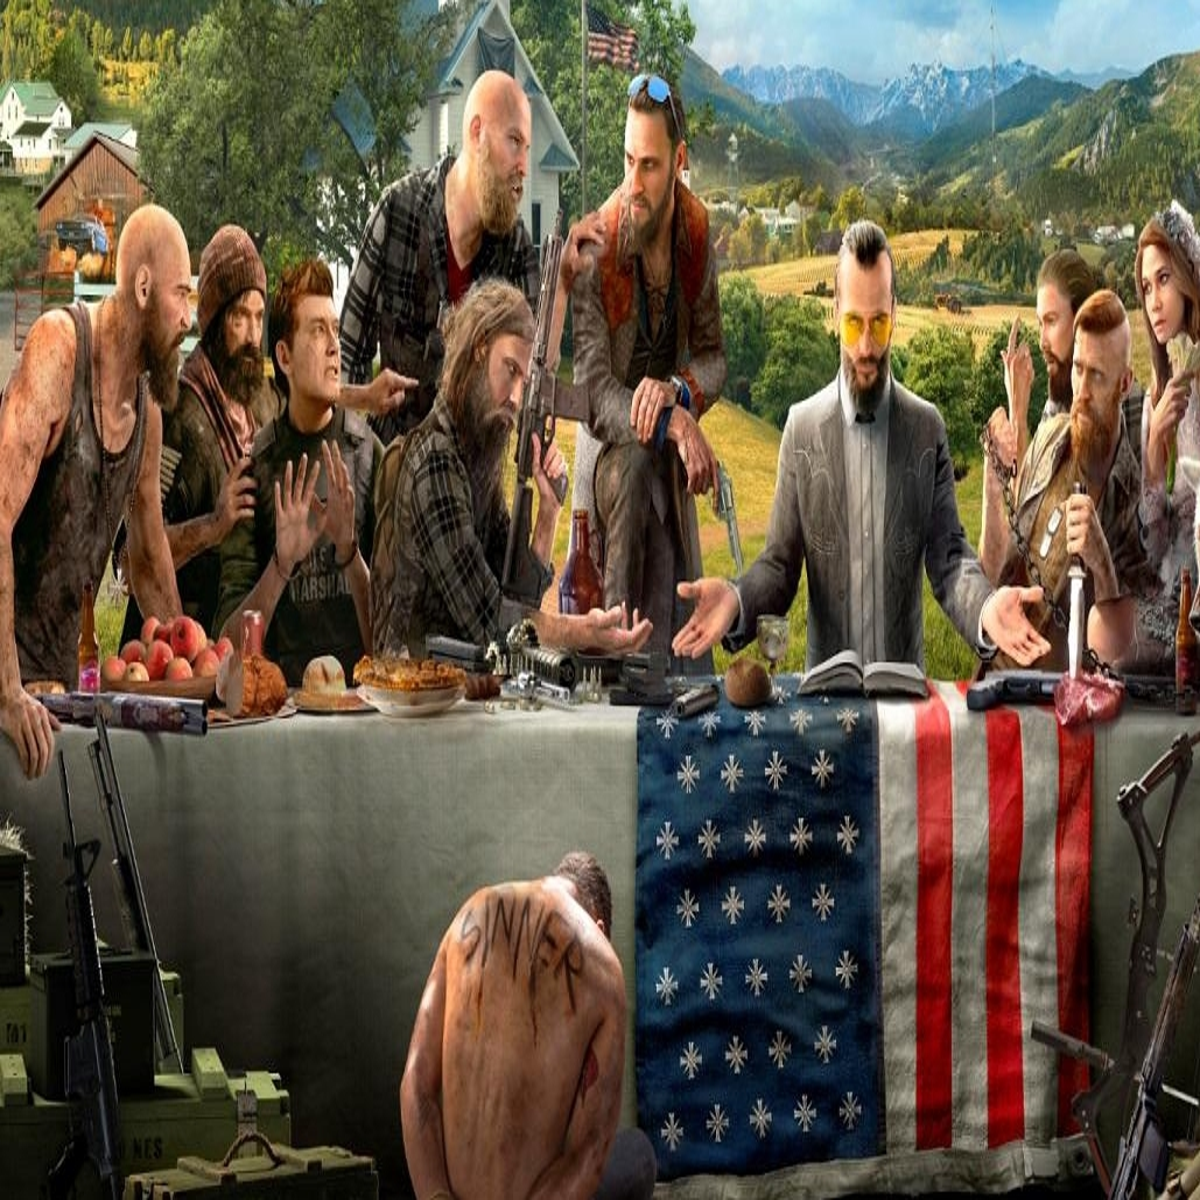 Ubisoft Celebrates Far Cry 5's Fifth Anniversary With Next-Gen